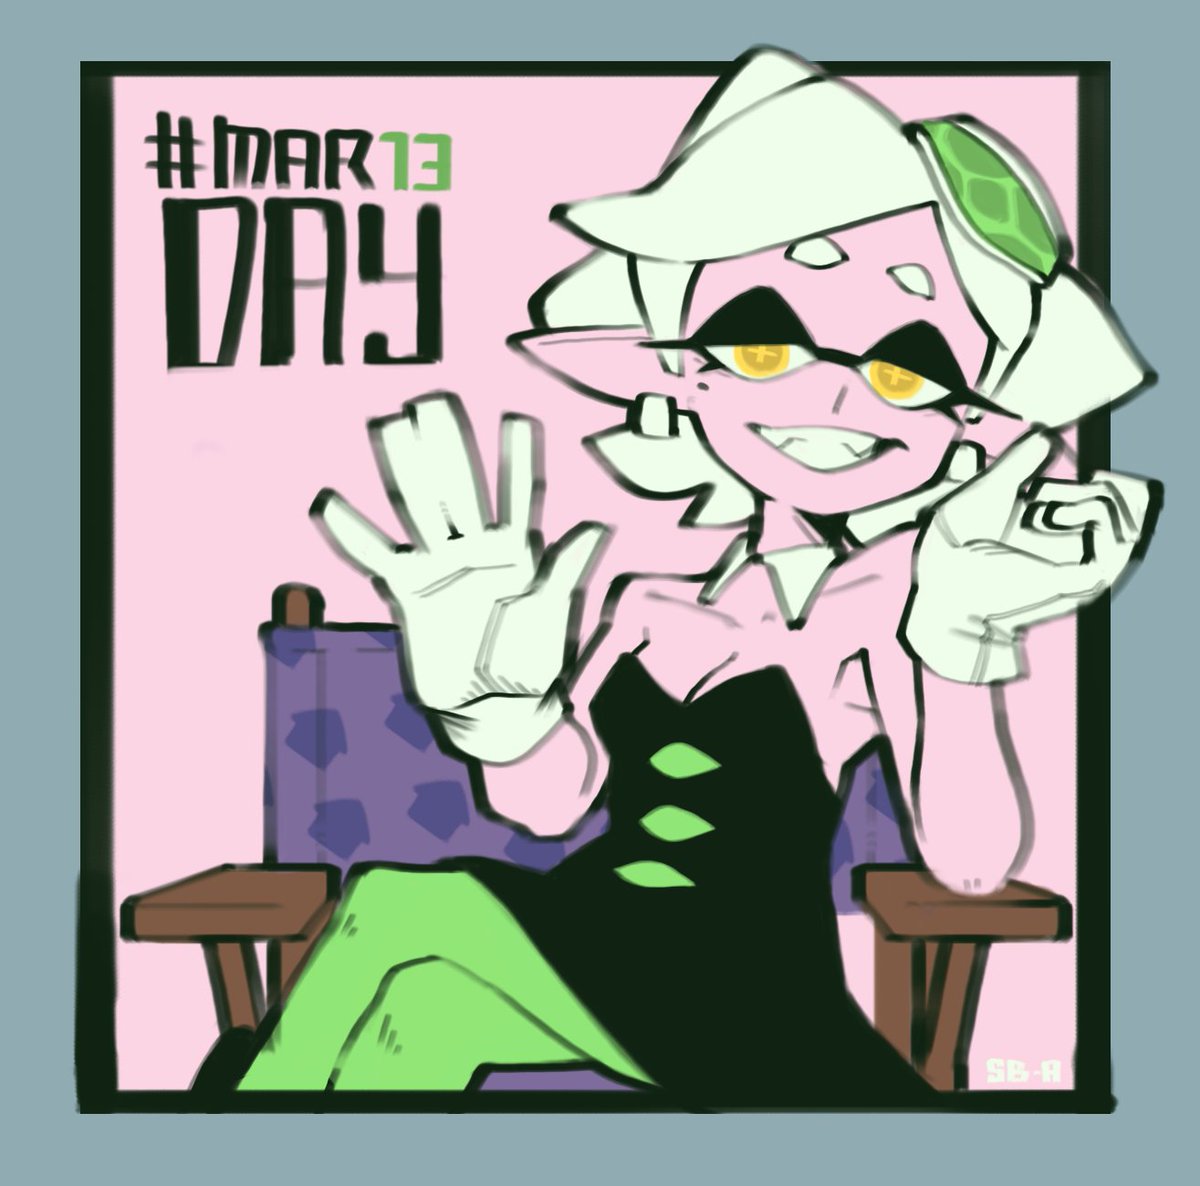 Hope I'm not too late for #Mar13Day